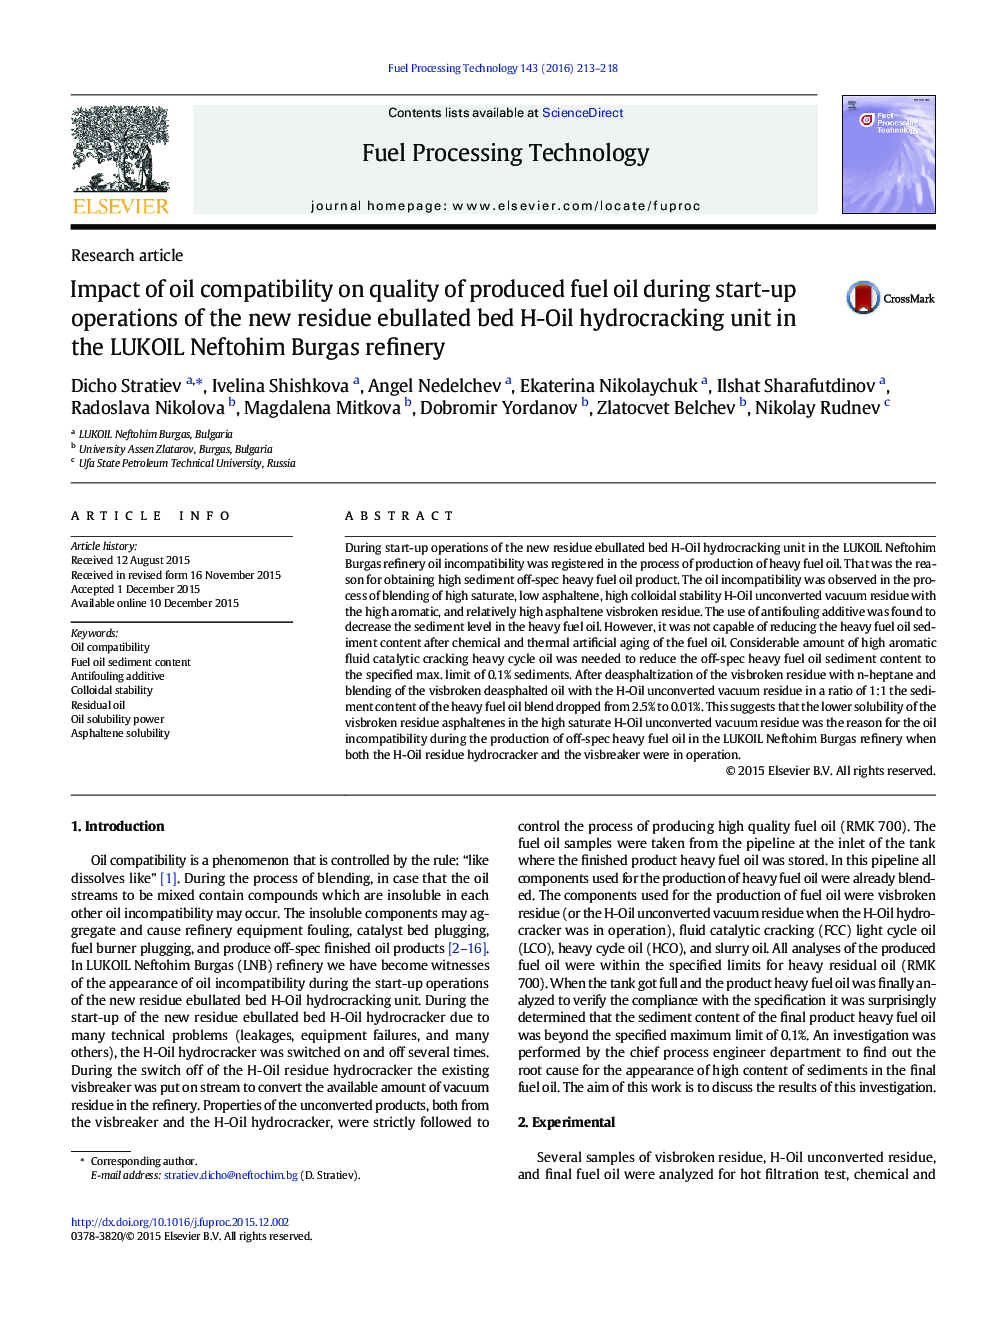 Impact of oil compatibility on quality of produced fuel oil during start-up operations of the new residue ebullated bed H-Oil hydrocracking unit in the LUKOIL Neftohim Burgas refinery